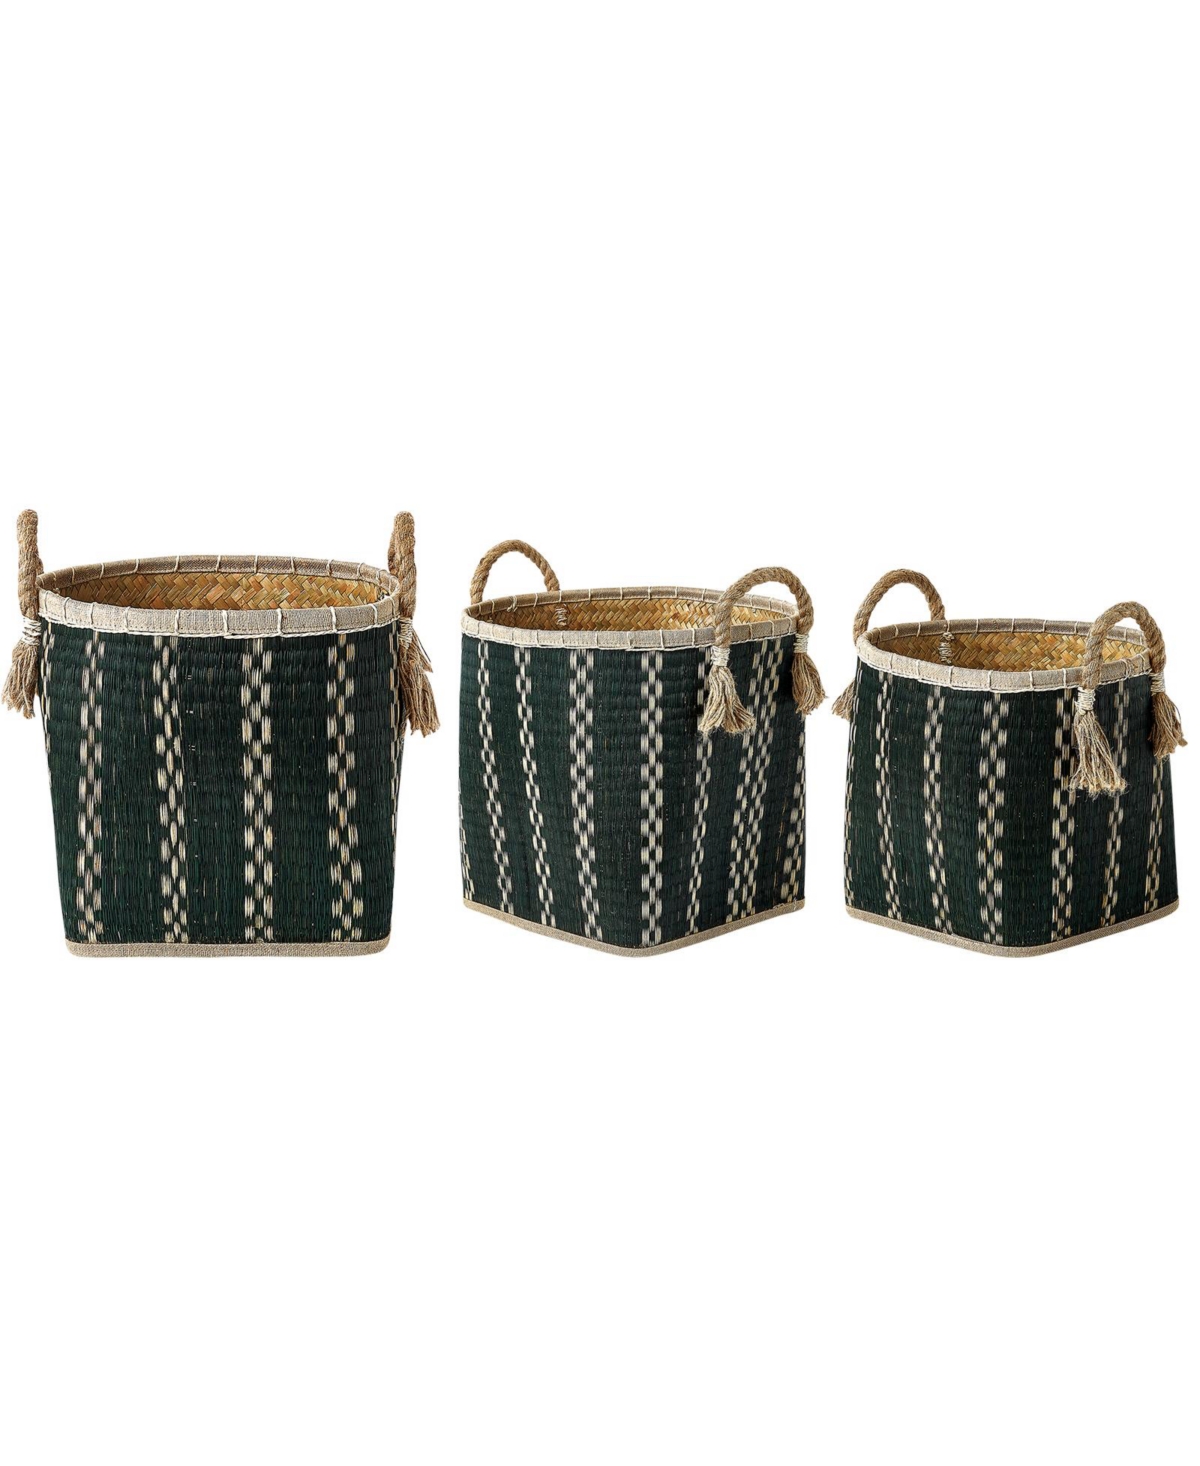 3 Piece Round Top and Square Bottom Palm Leave Basket Set with Rope Handles and Tassels - Black and Natural